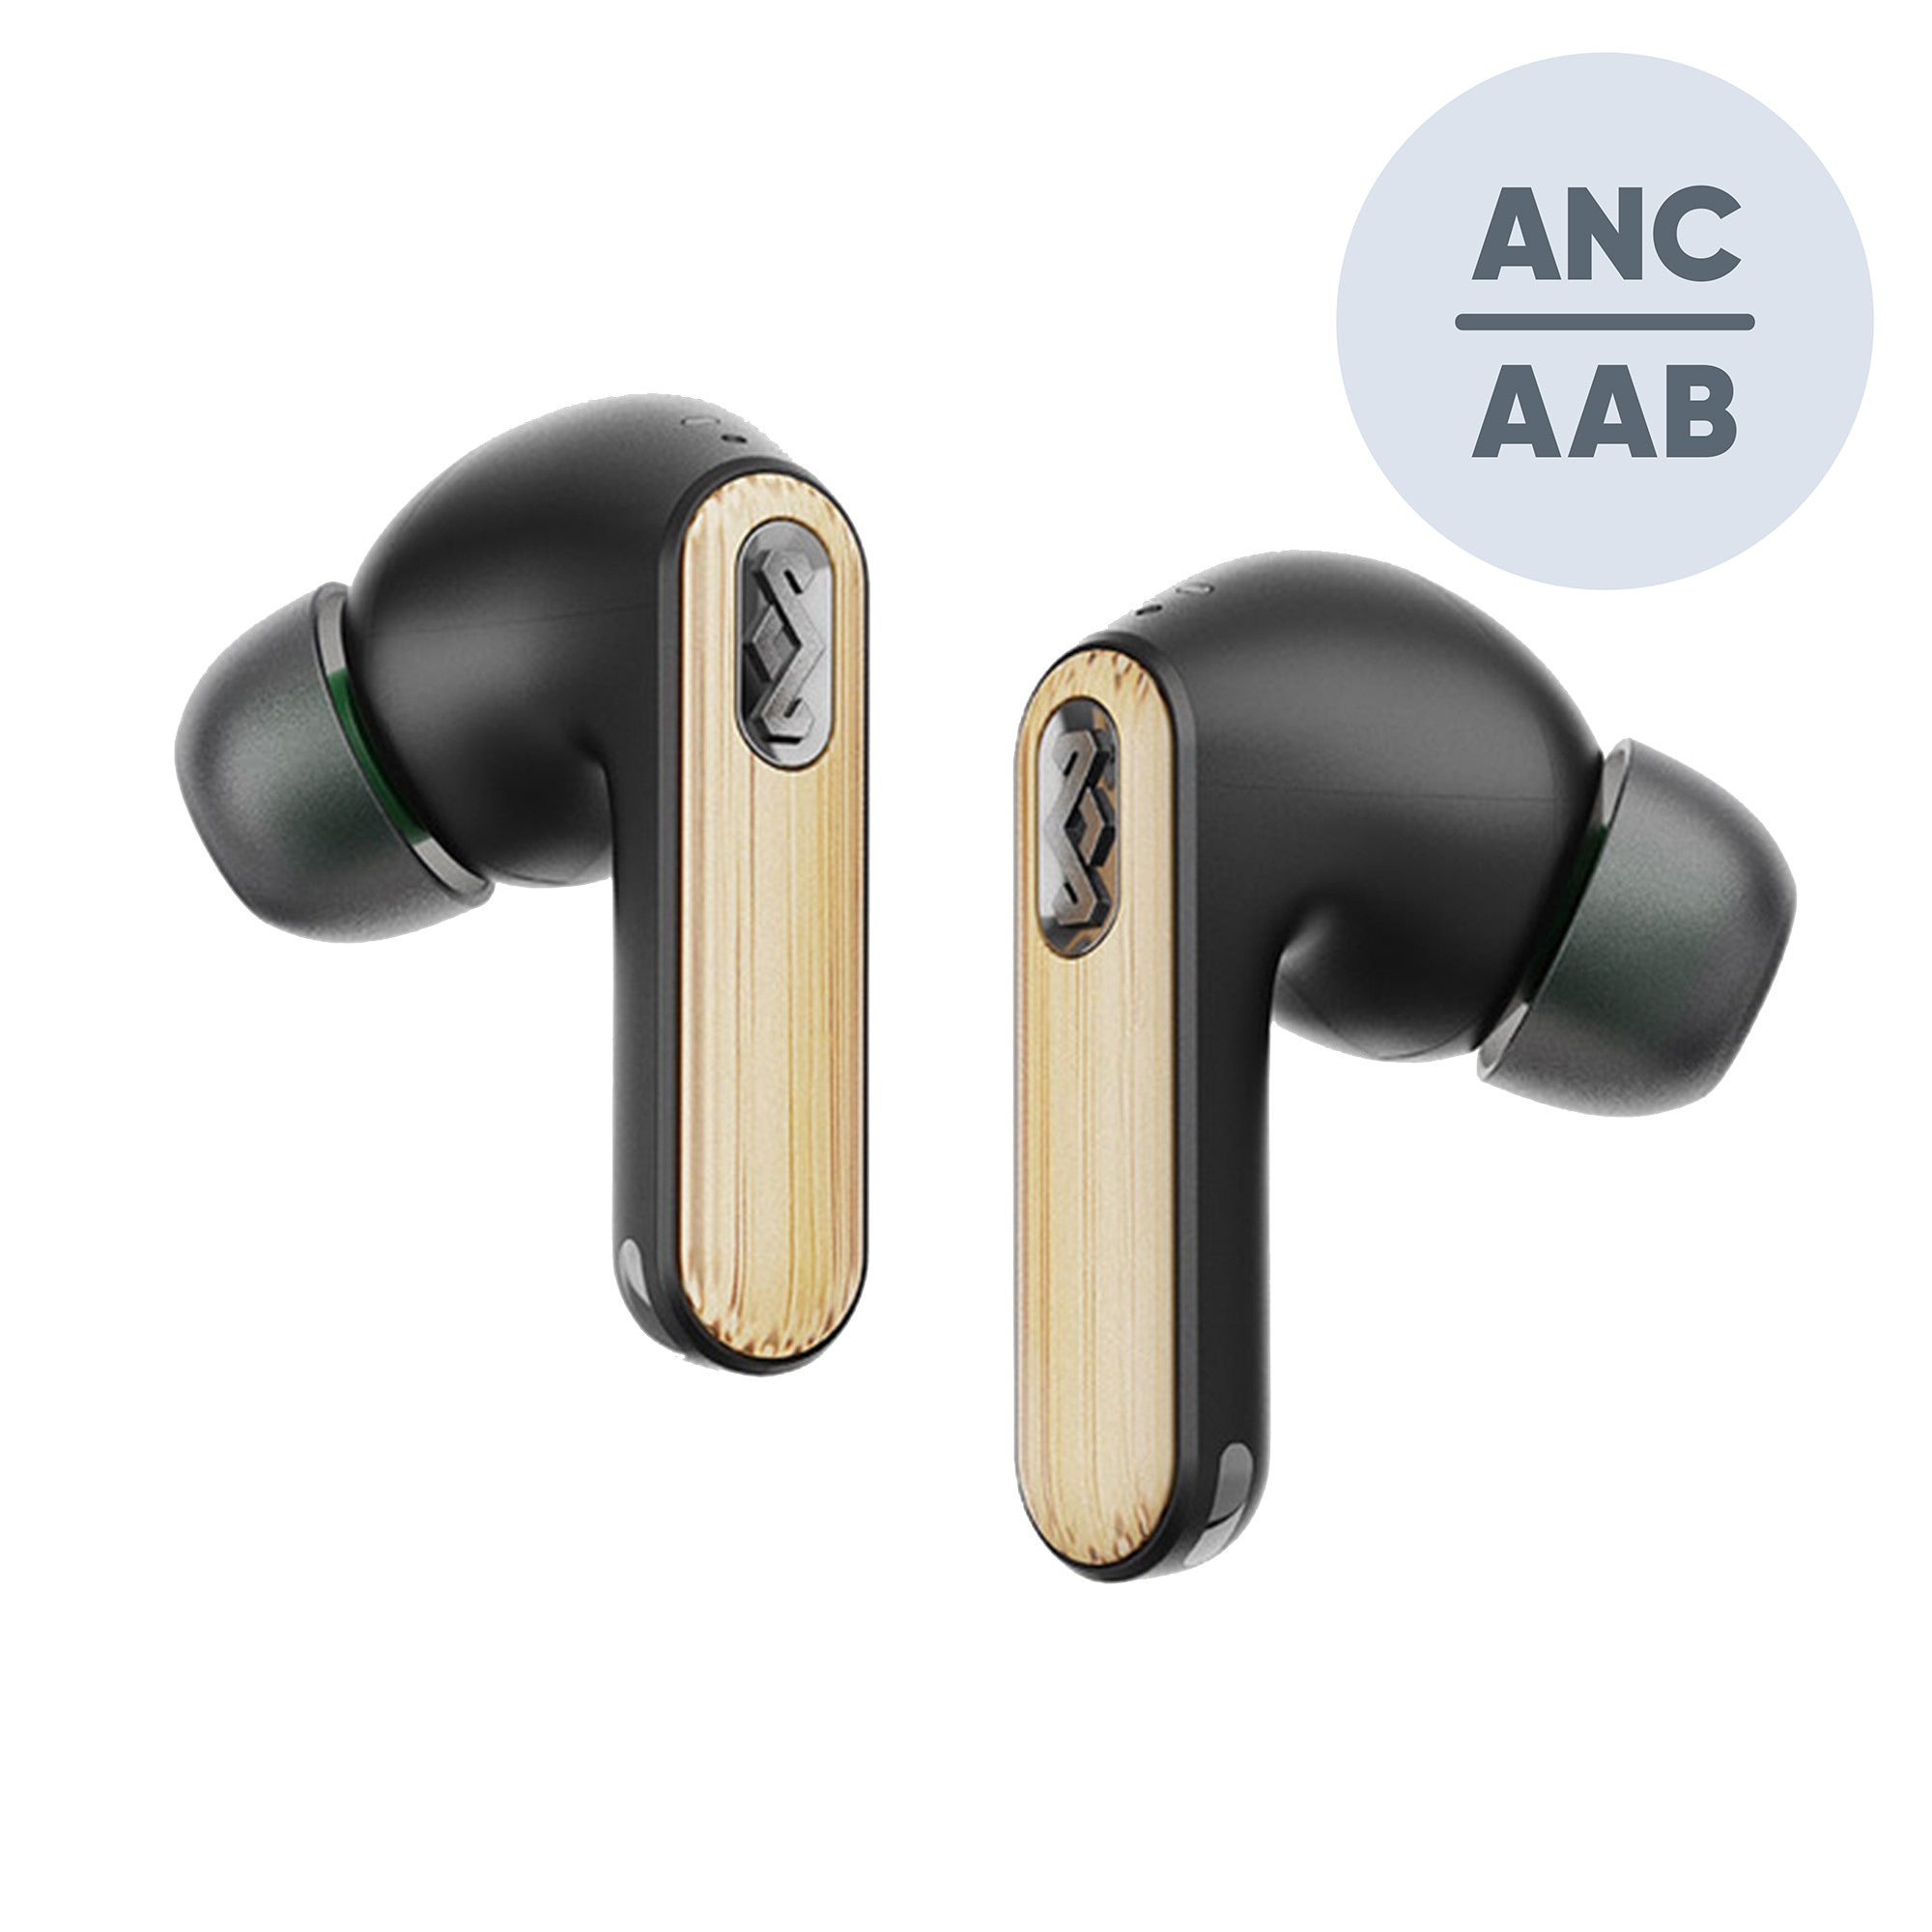 House of Marley Redemption ANC 2 True Wireless Earbuds - Black - 15-10775